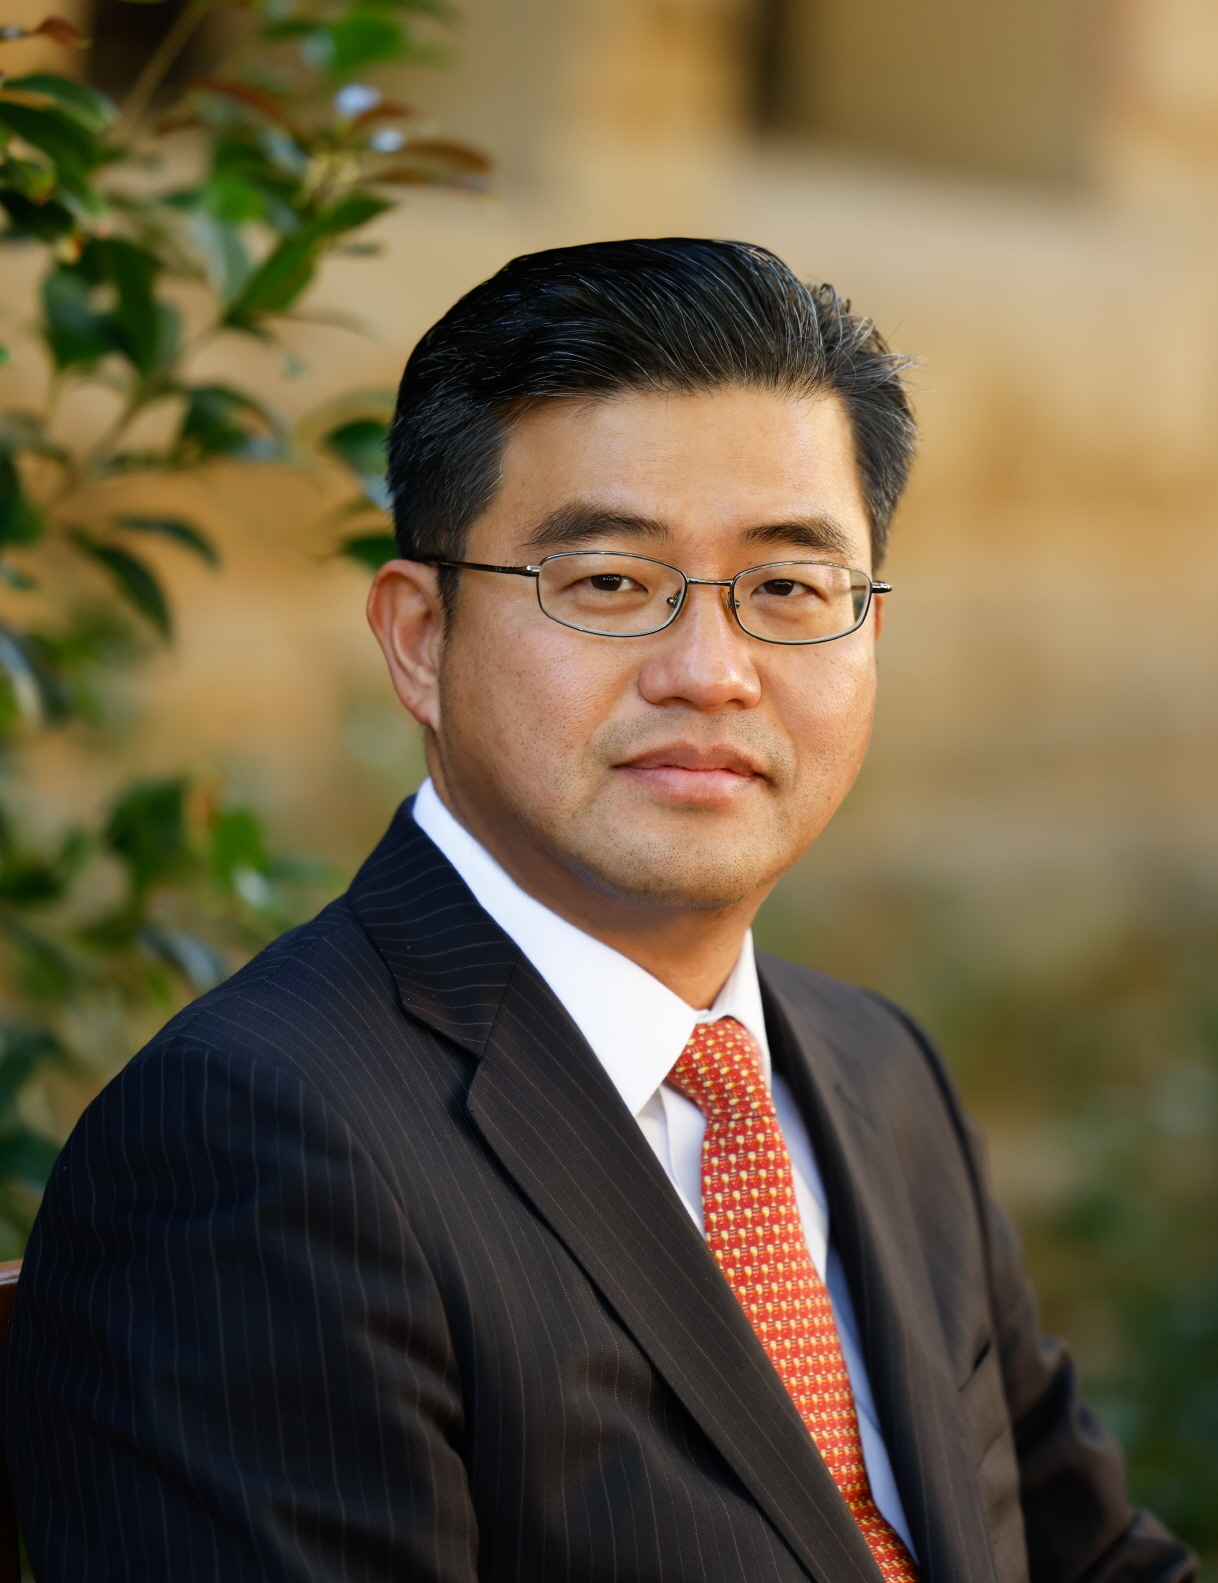 LG Energy Solution’s new Chief Digital Officer Pyung Kyung-suk